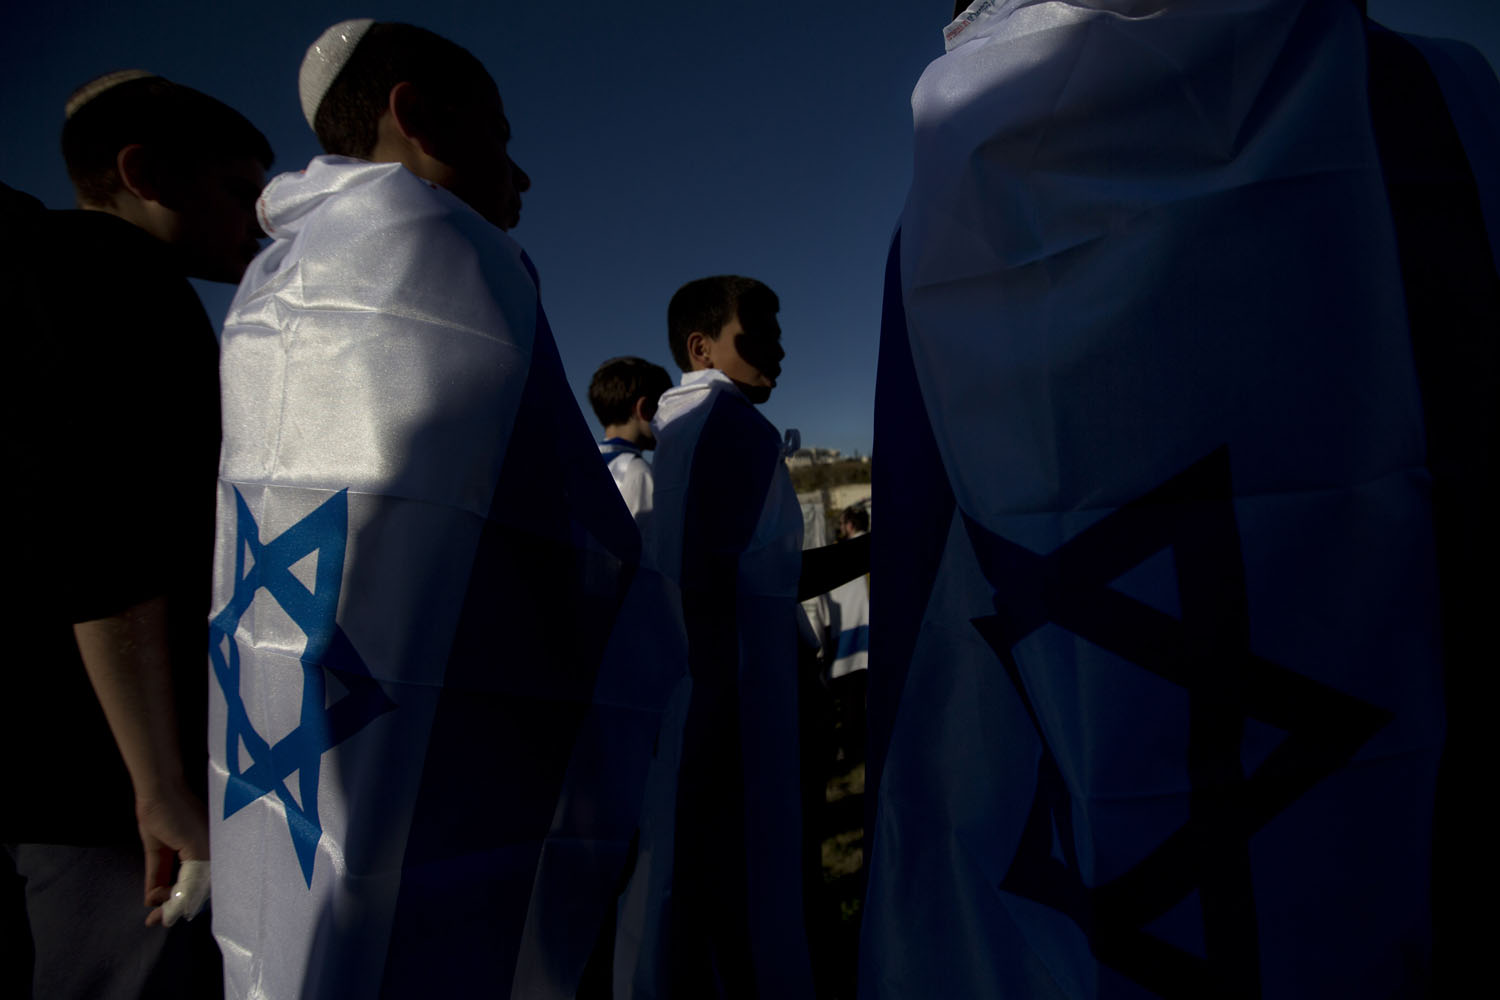 Feb. 13, 2014. Israeli youths stand covered with national flags prior to a march from the West Bank settlement of Maaleh Adumim, to the E-1 area on the eastern outskirts of Jerusalem.